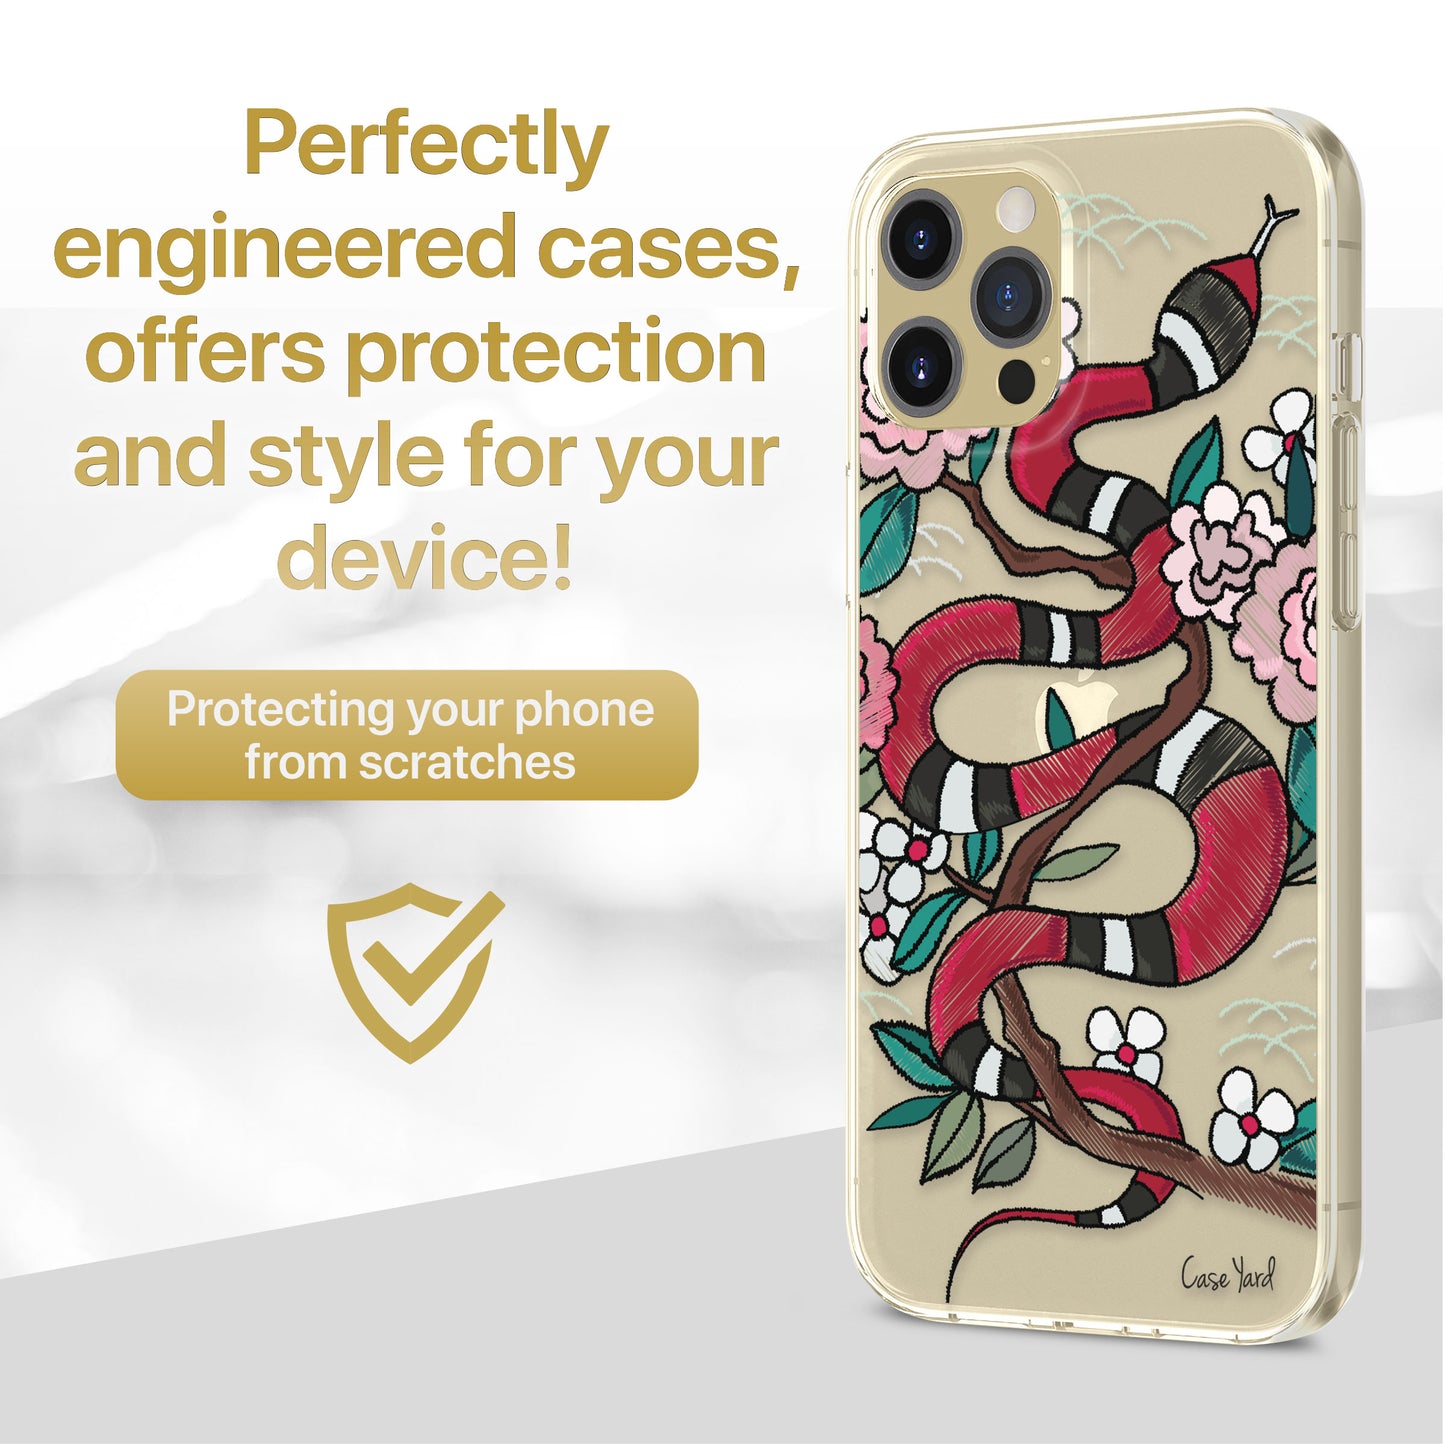 TPU Case Clear case with (Flower Snake) Design for iPhone & Samsung Phones